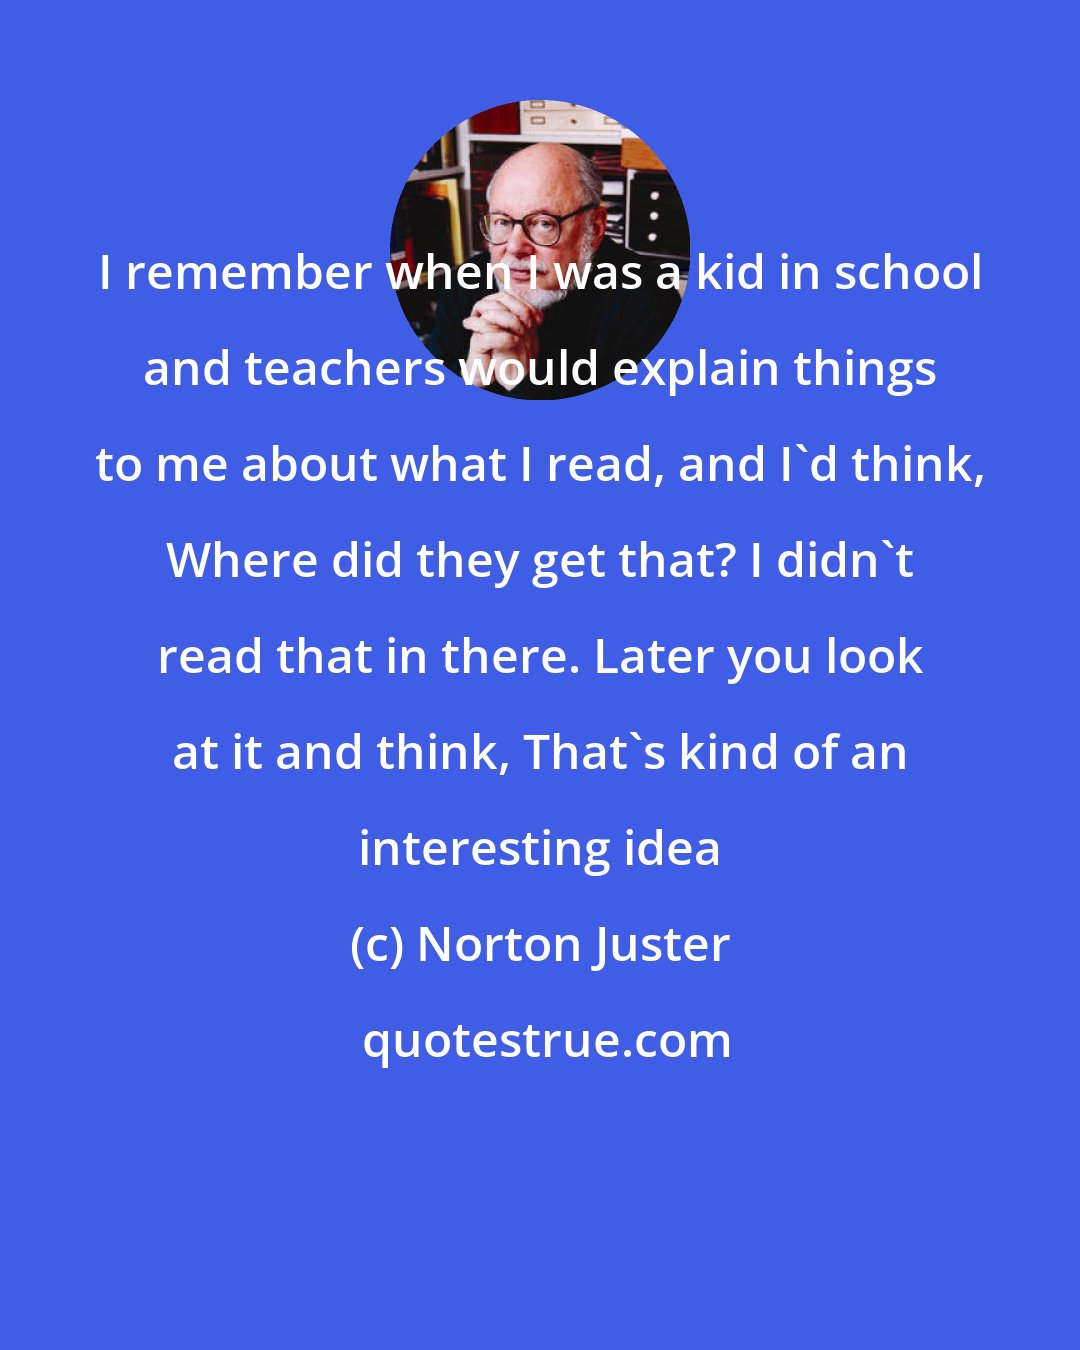 Norton Juster: I remember when I was a kid in school and teachers would explain things to me about what I read, and I'd think, Where did they get that? I didn't read that in there. Later you look at it and think, That's kind of an interesting idea